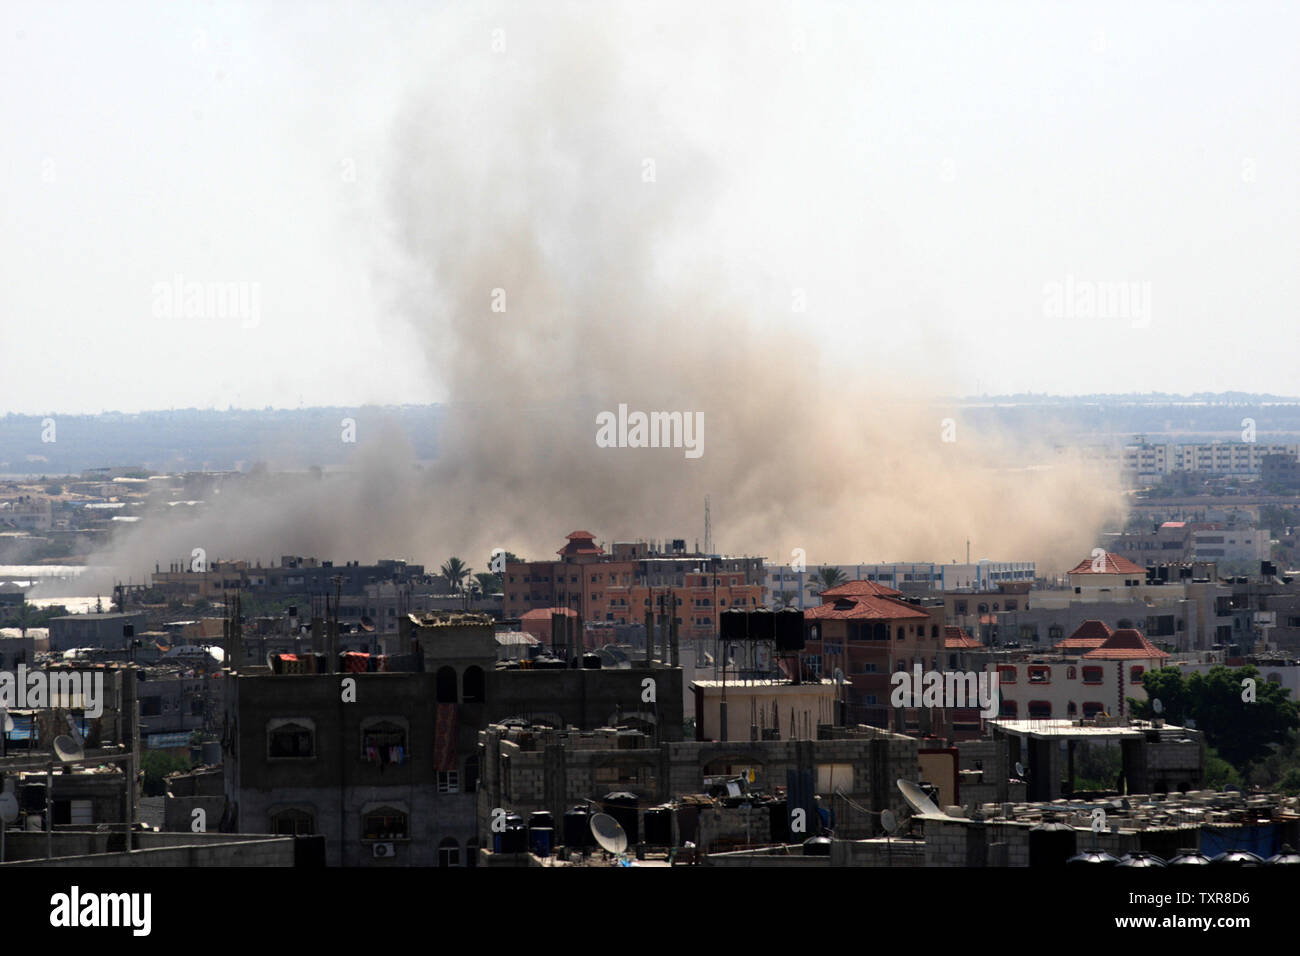 Smoke rises over Rafah in the southern Gaza Strip after an Israeli strike on August 8, 2014.   Hamas rejected an extension of the three-day truce being negotiated in Egypt since they say Israel rejected all of the Hamas demands. UPI/Ismael Mohamad Stock Photo